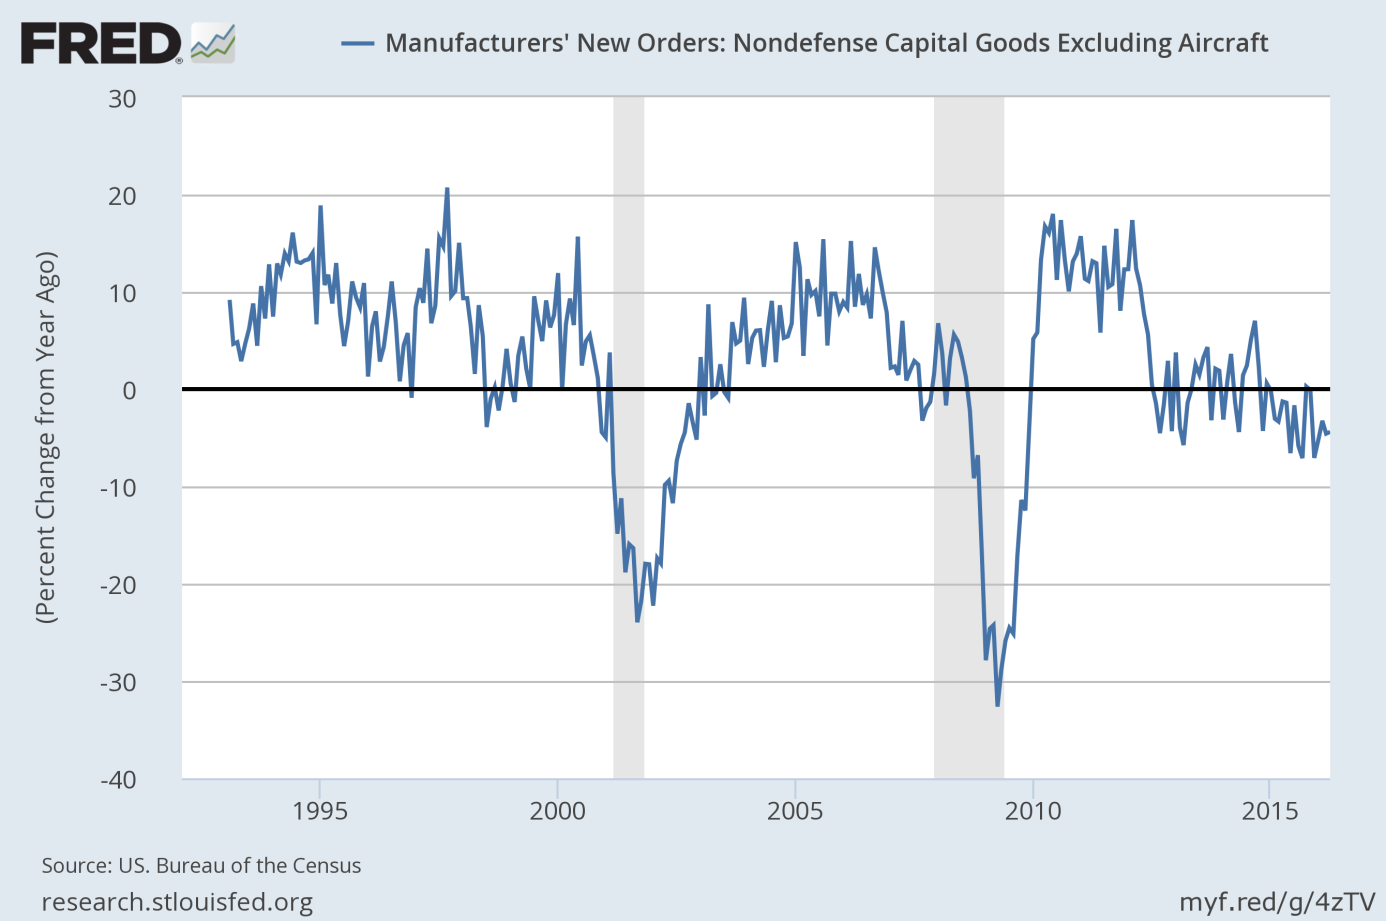 Manufacturers’ new orders of nondefense capital goods